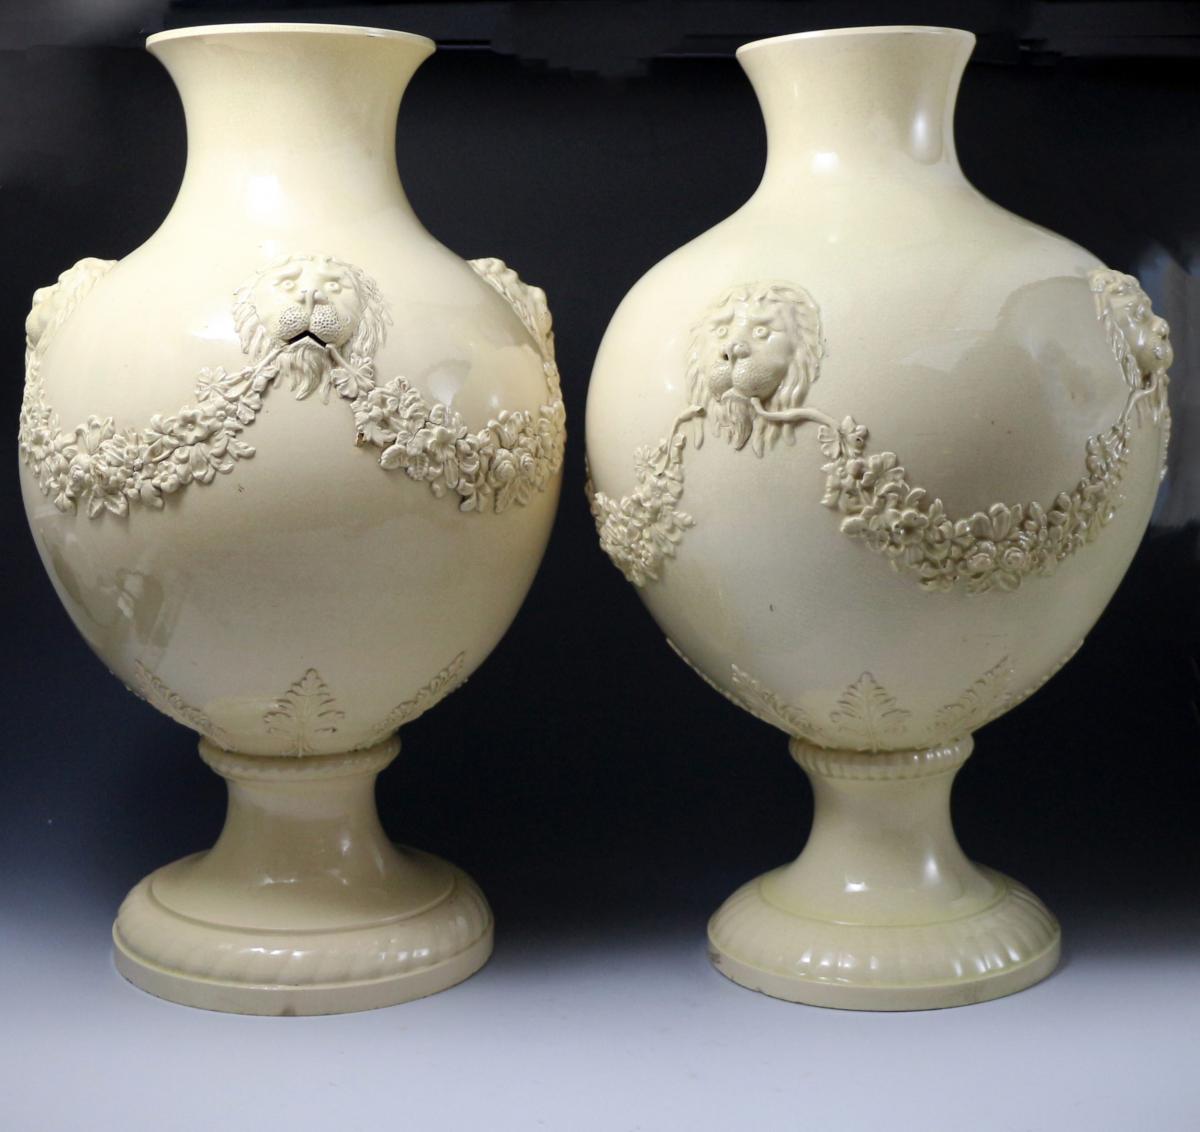 An impressive pair of Wedgwood creamware pottery vases with lion head masks circa 1765